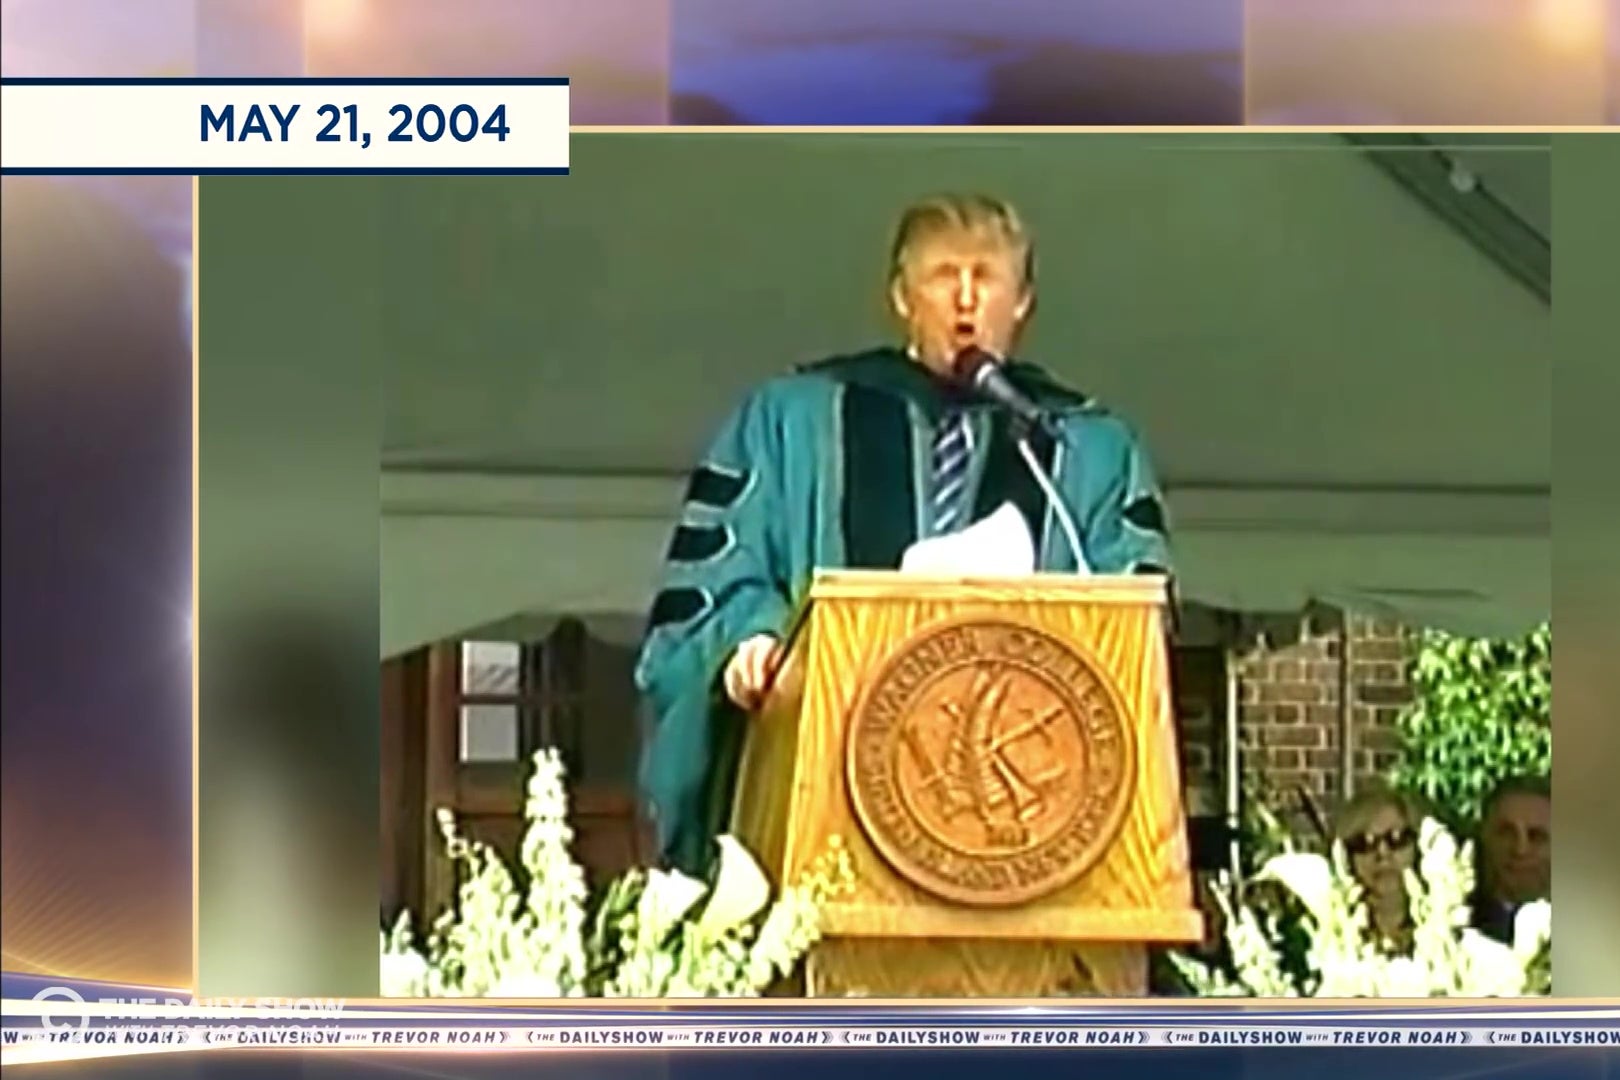 President Trump giving a commencement address.